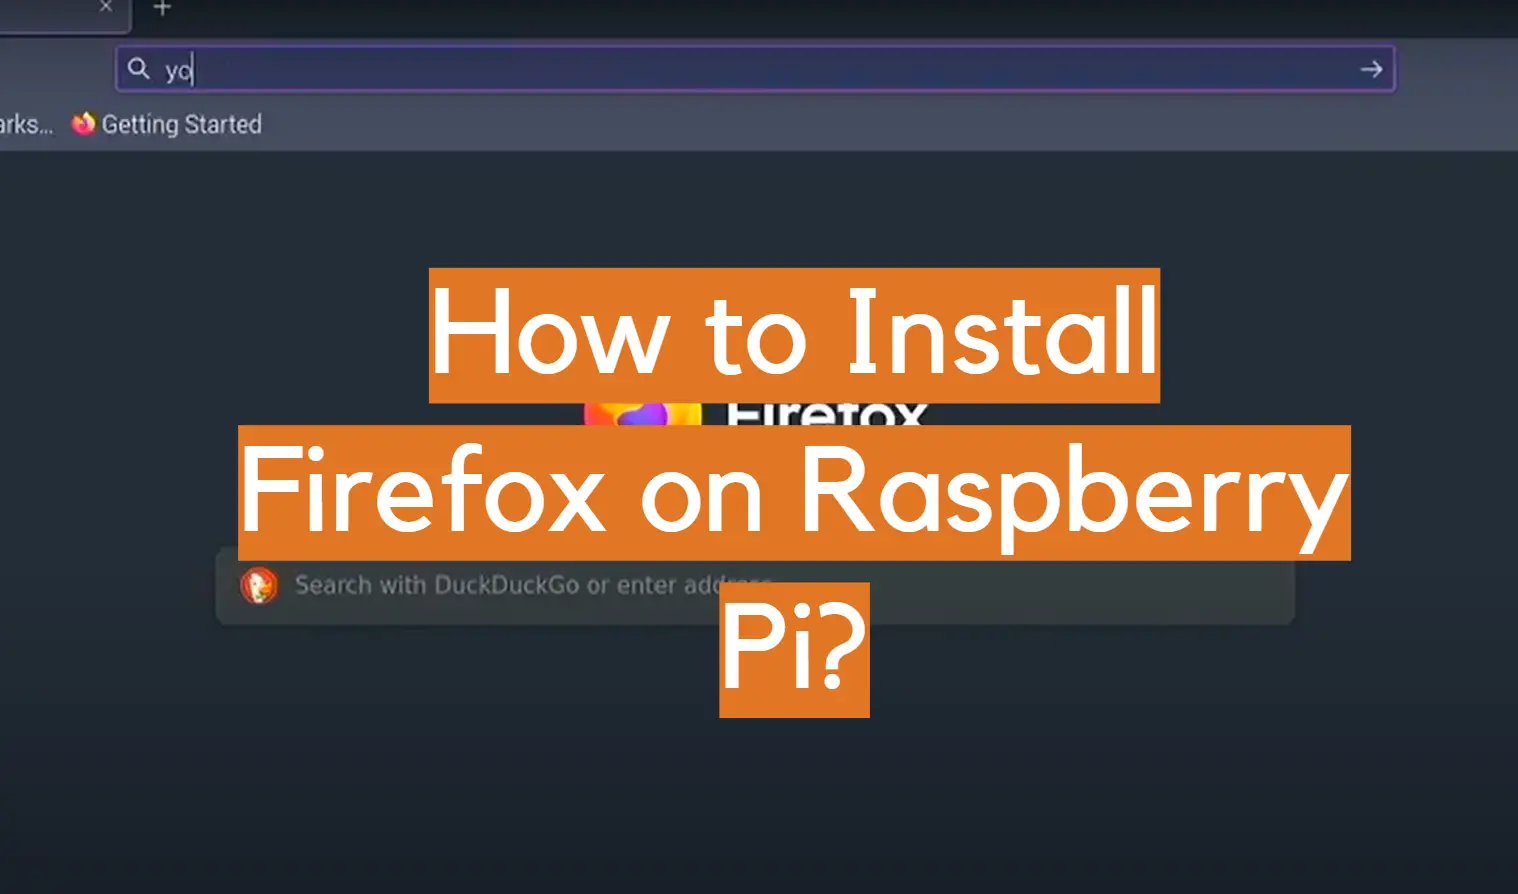 How to Install Firefox on Raspberry Pi?